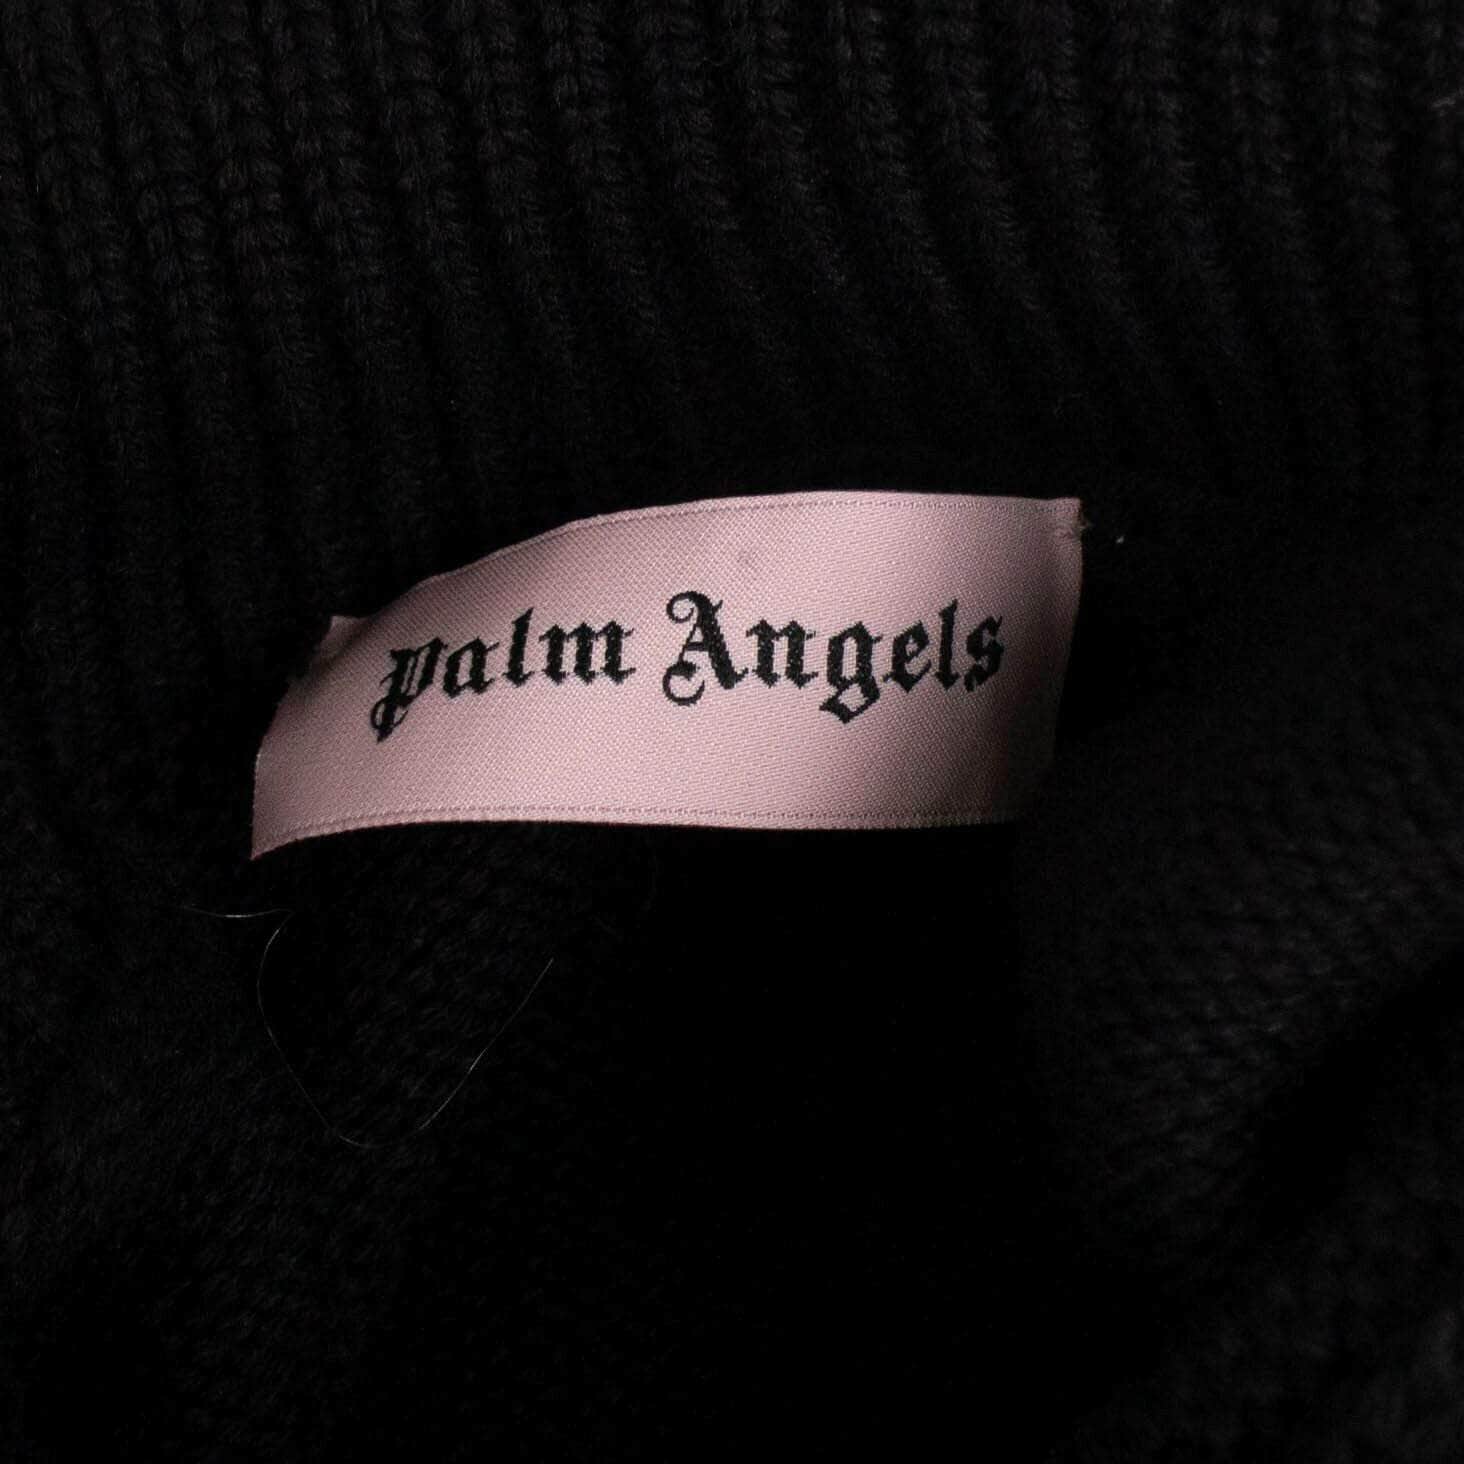 PALM ANGELS 750-1000, couponcollection, gender-mens, main-clothing, mens-knitwear, palm-angels, size-m M Black Wool Zip Detail Sweater 82NGG-PA-1299/M 82NGG-PA-1299/M